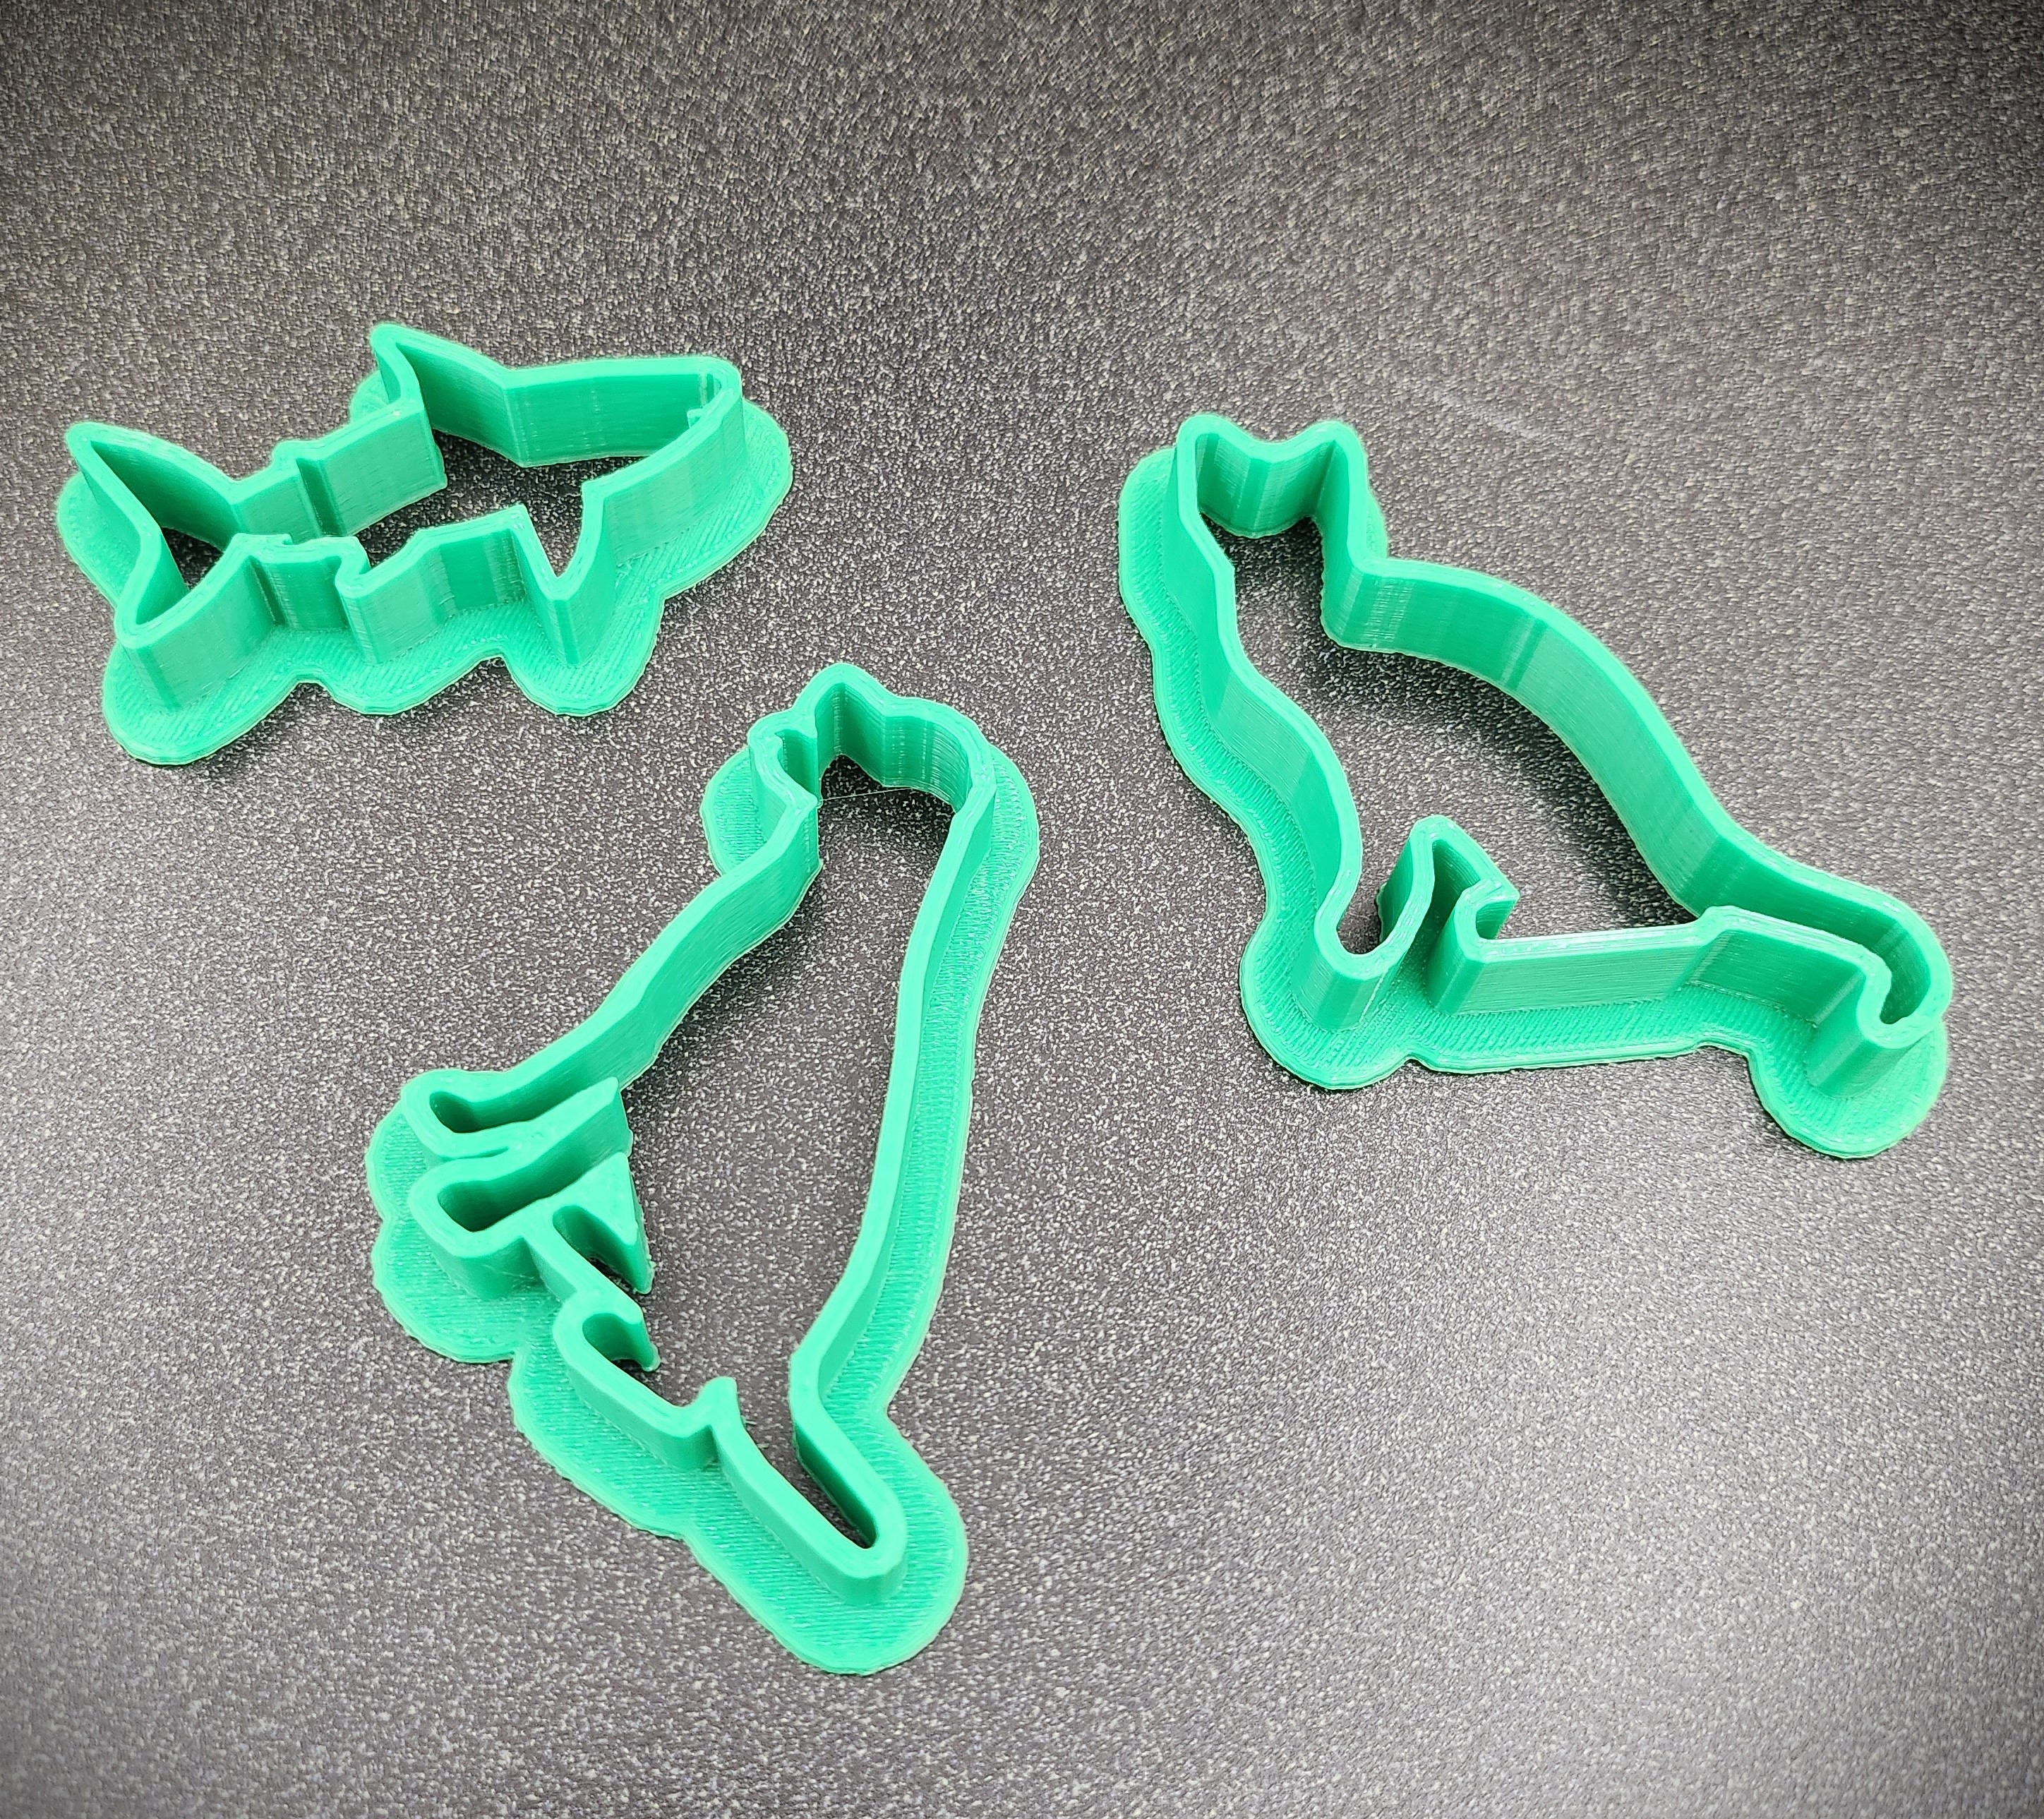 photo of bright green 3D printed cookie cutters in the shape of a shark, dog, and cat